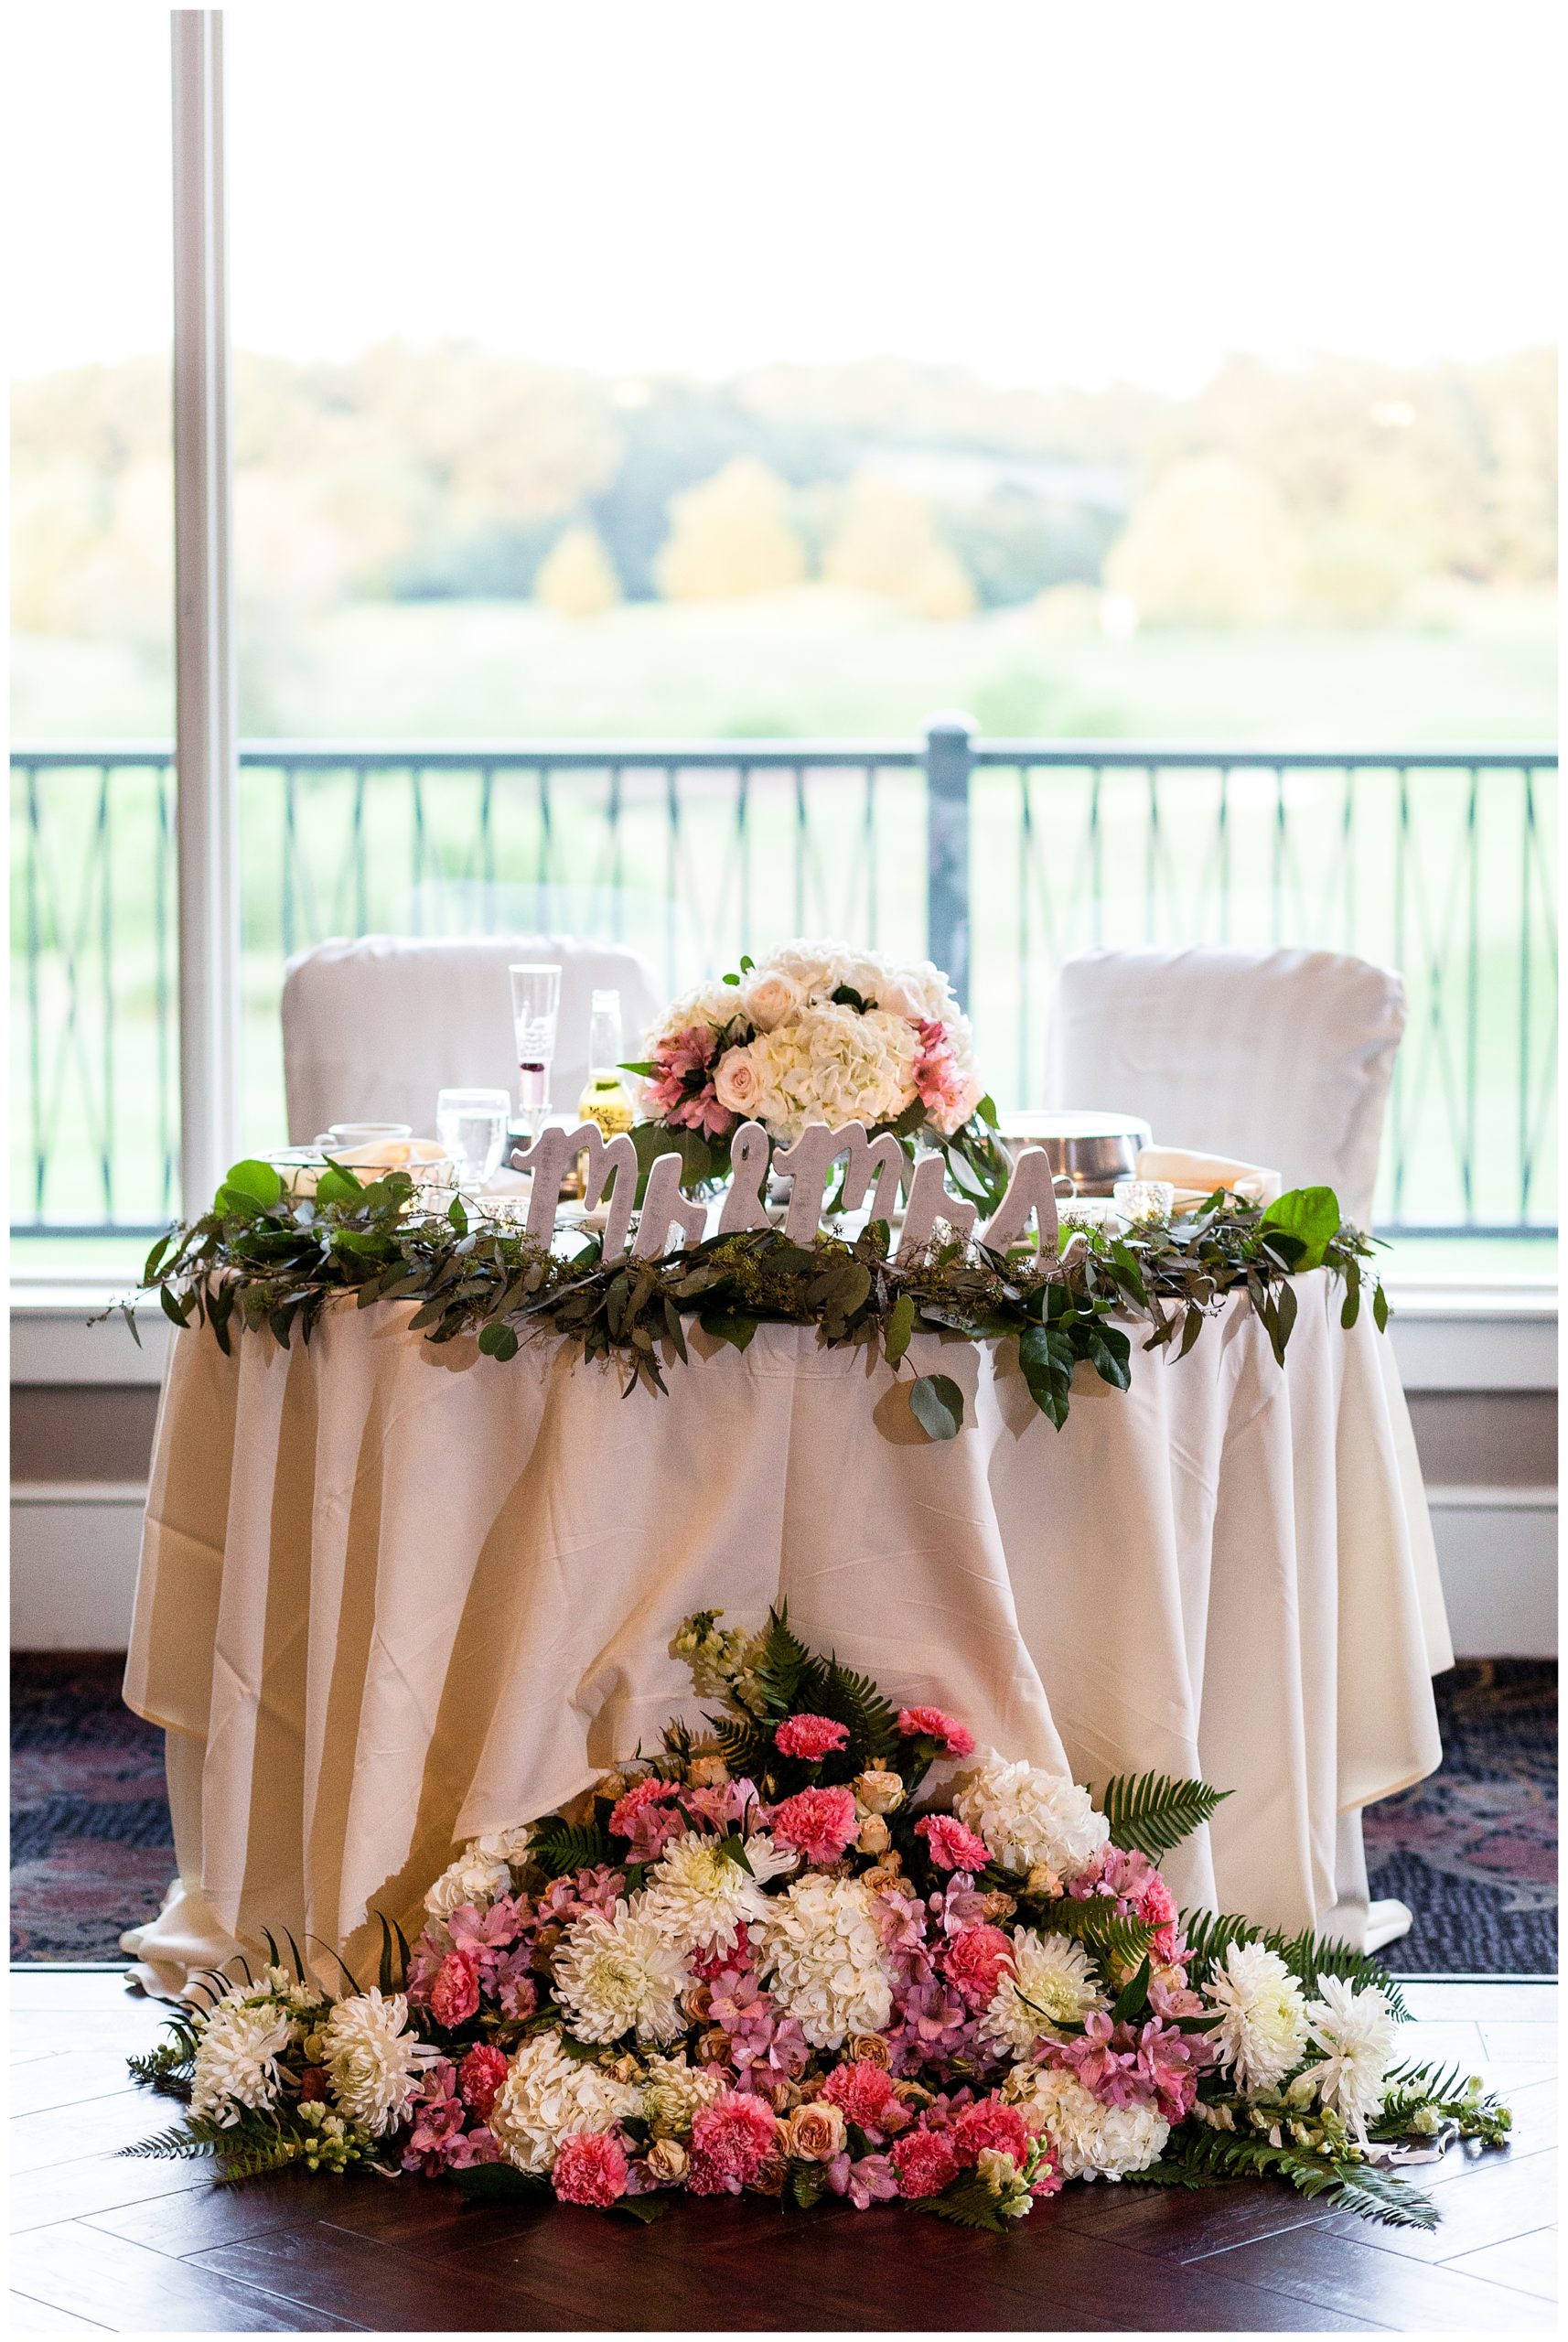 Sweetheart table with mr and mrs sign and large floral detail at Scotland Run wedding reception